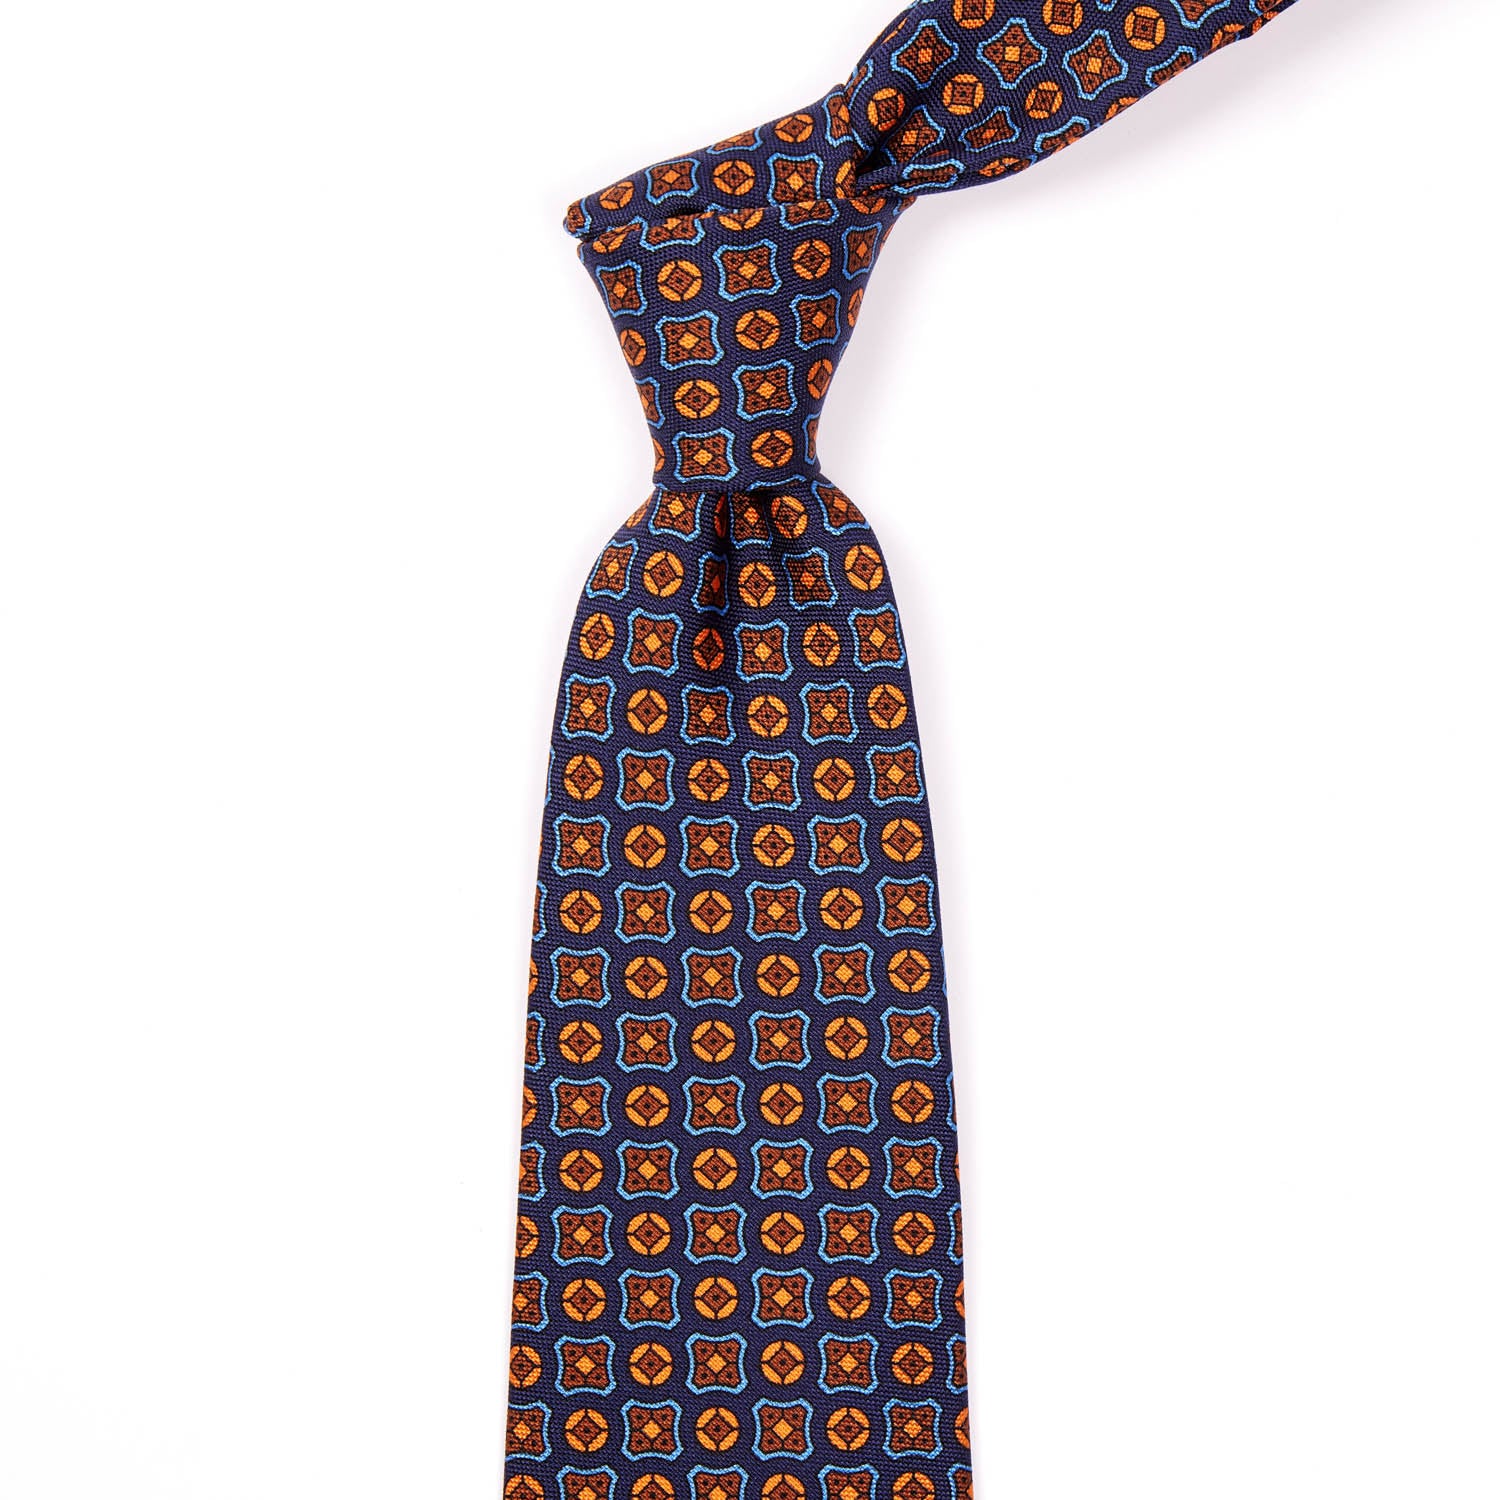 A Sovereign Grade Navy Hopsack tie, 150 cm from KirbyAllison.com, with a floral pattern.